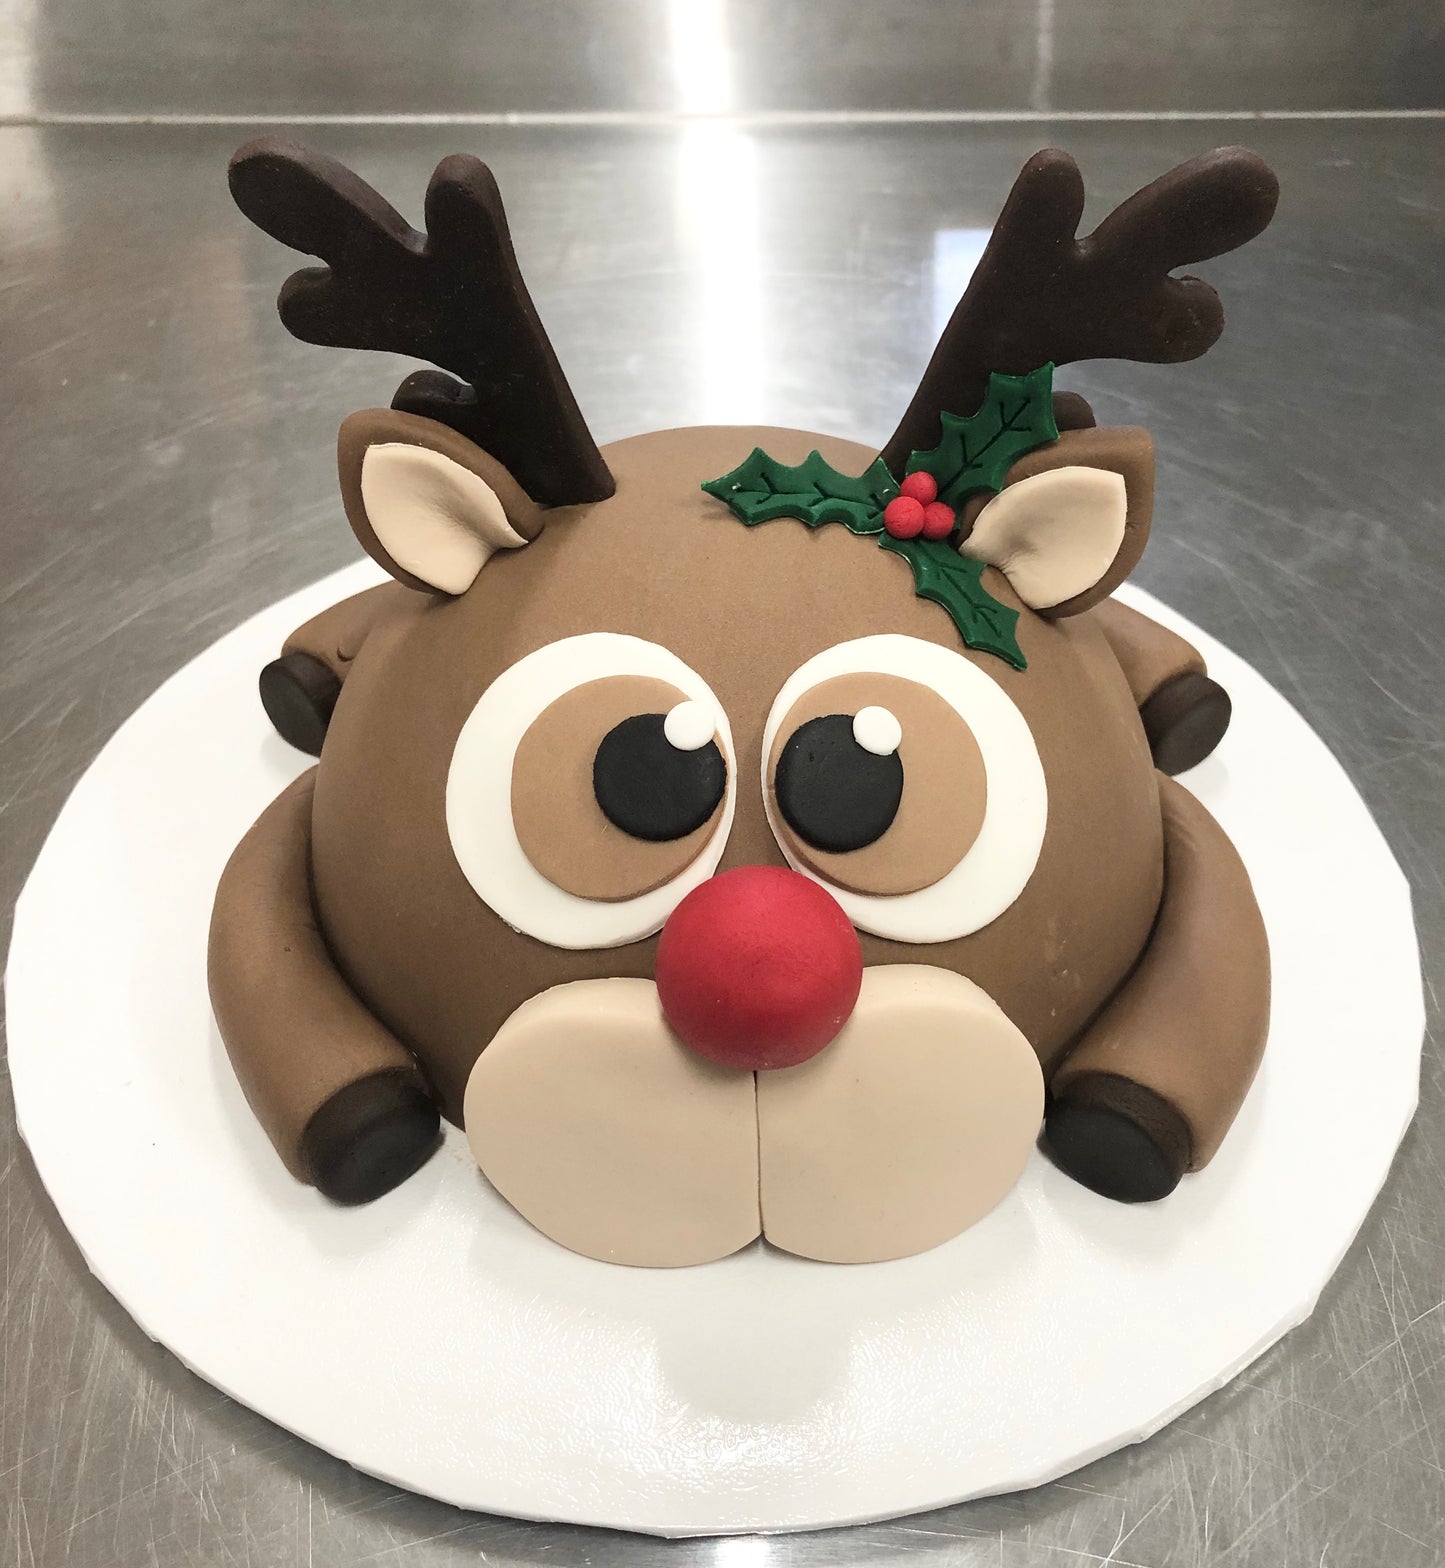 Cake in the box - Rudolph - Add on kit